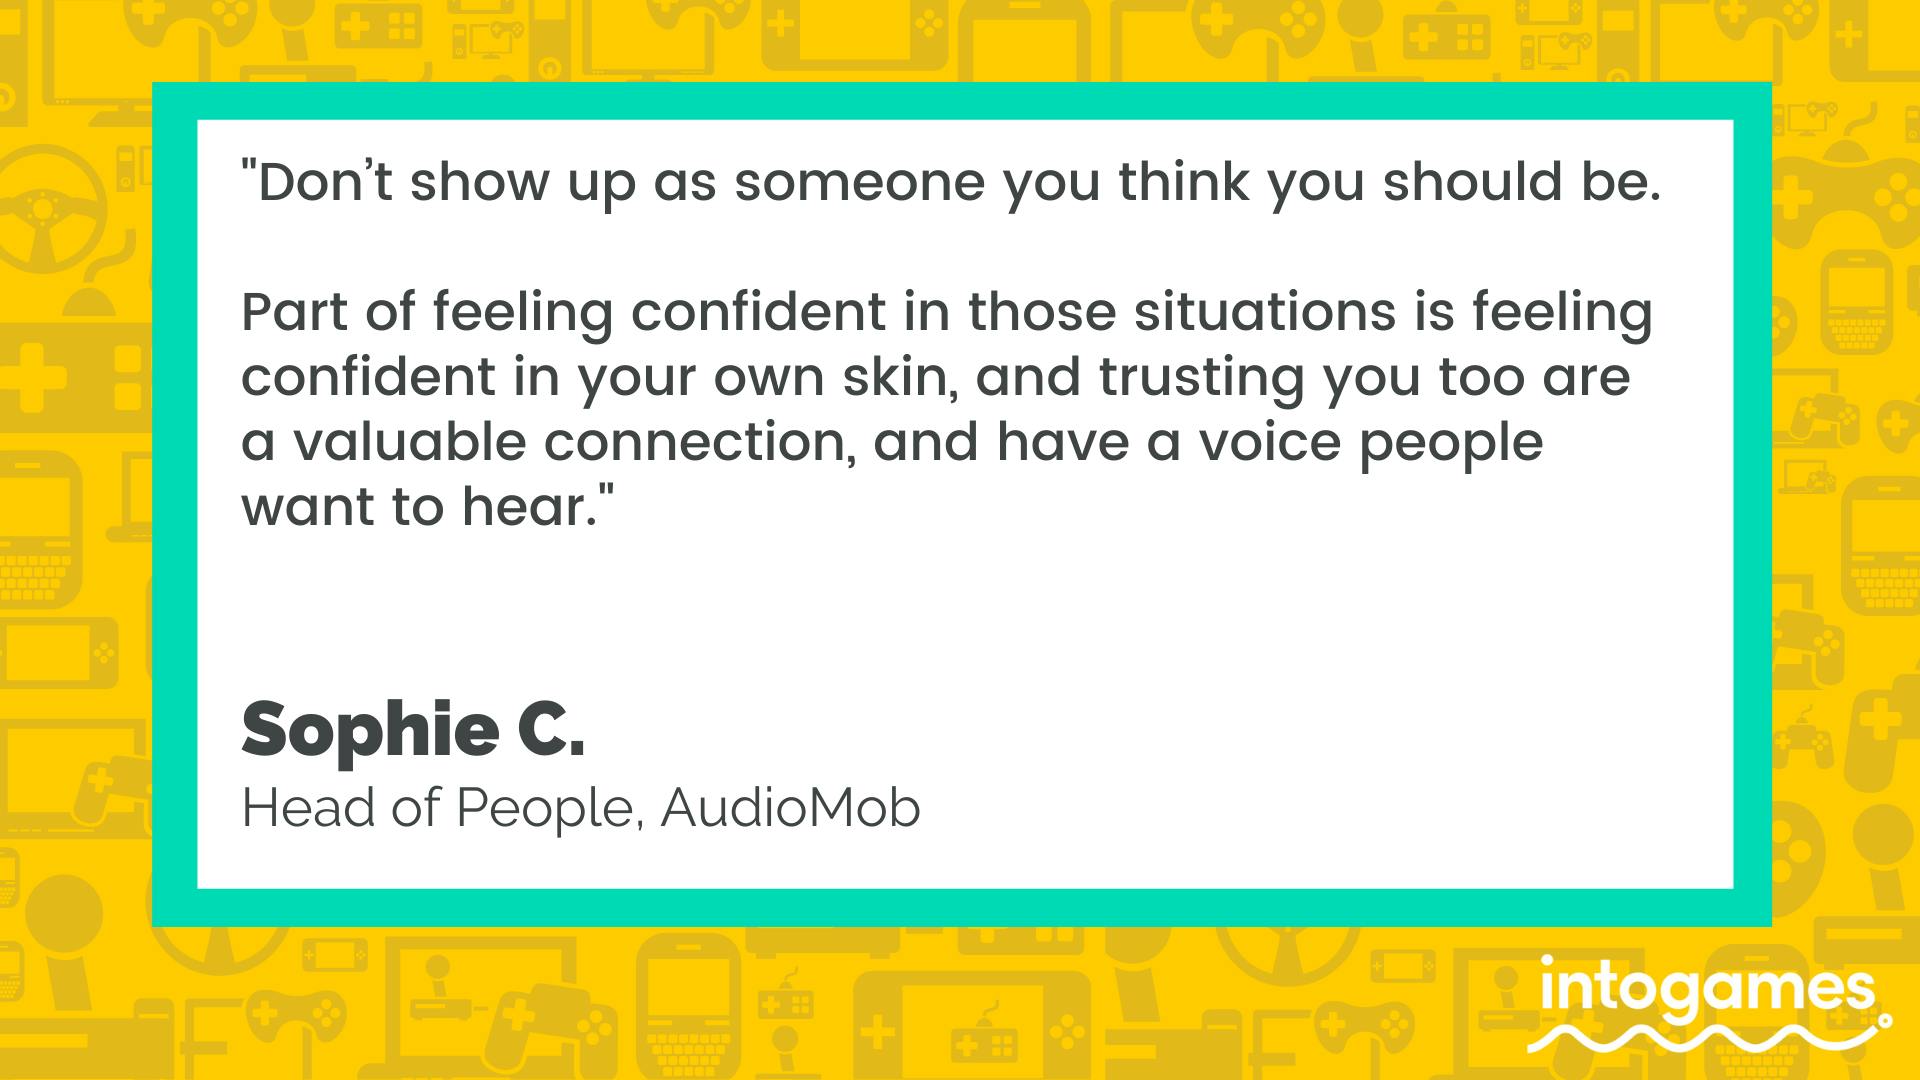 "Don't show up as someone you think you should be. Part of feeling confident in those situations is feeling confident in your own skin, and trusting you too are a valuable connection, and have a voice people want to hear."  - Sophie C., Head of People, AudioMob. 